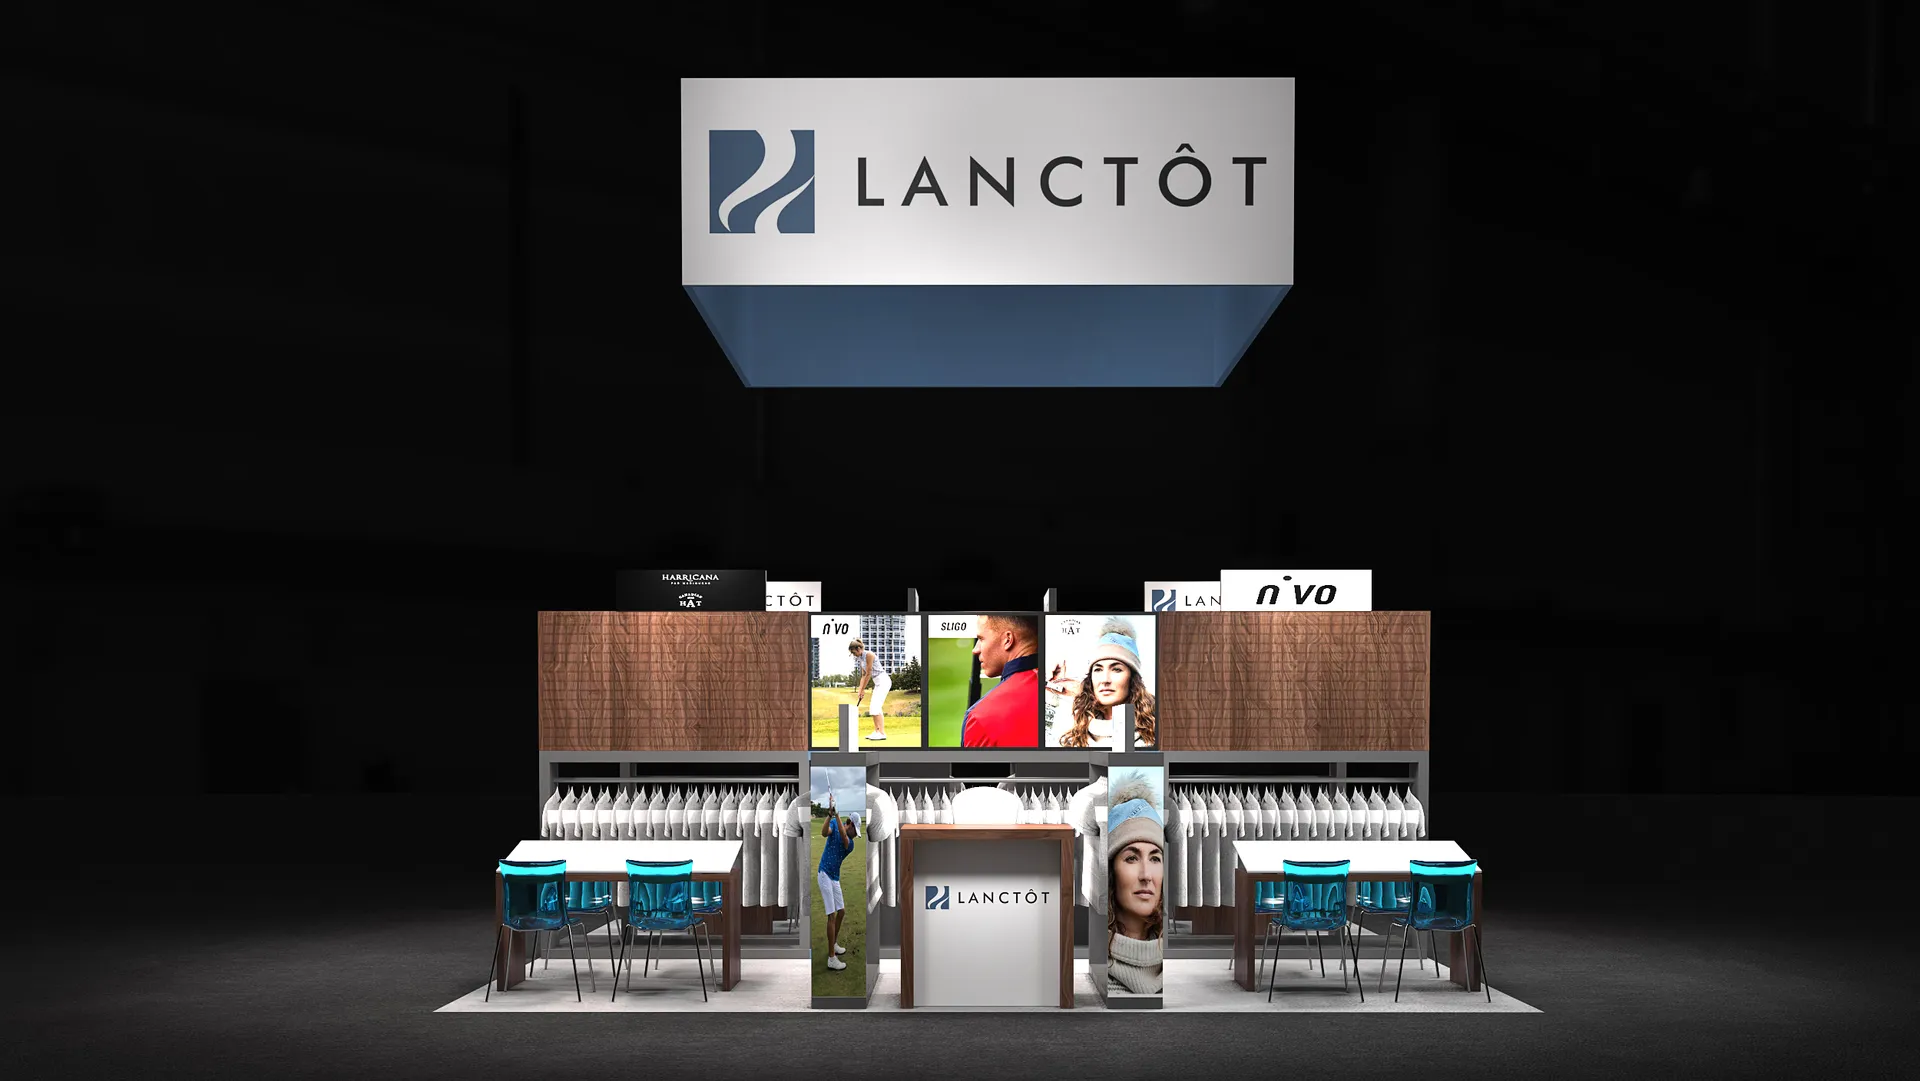 booth-design-projects/The Reaction Space/2024-04-11-20x20-ISLAND-Project-25/Lanctot_Option2_01-l740jj.jpg